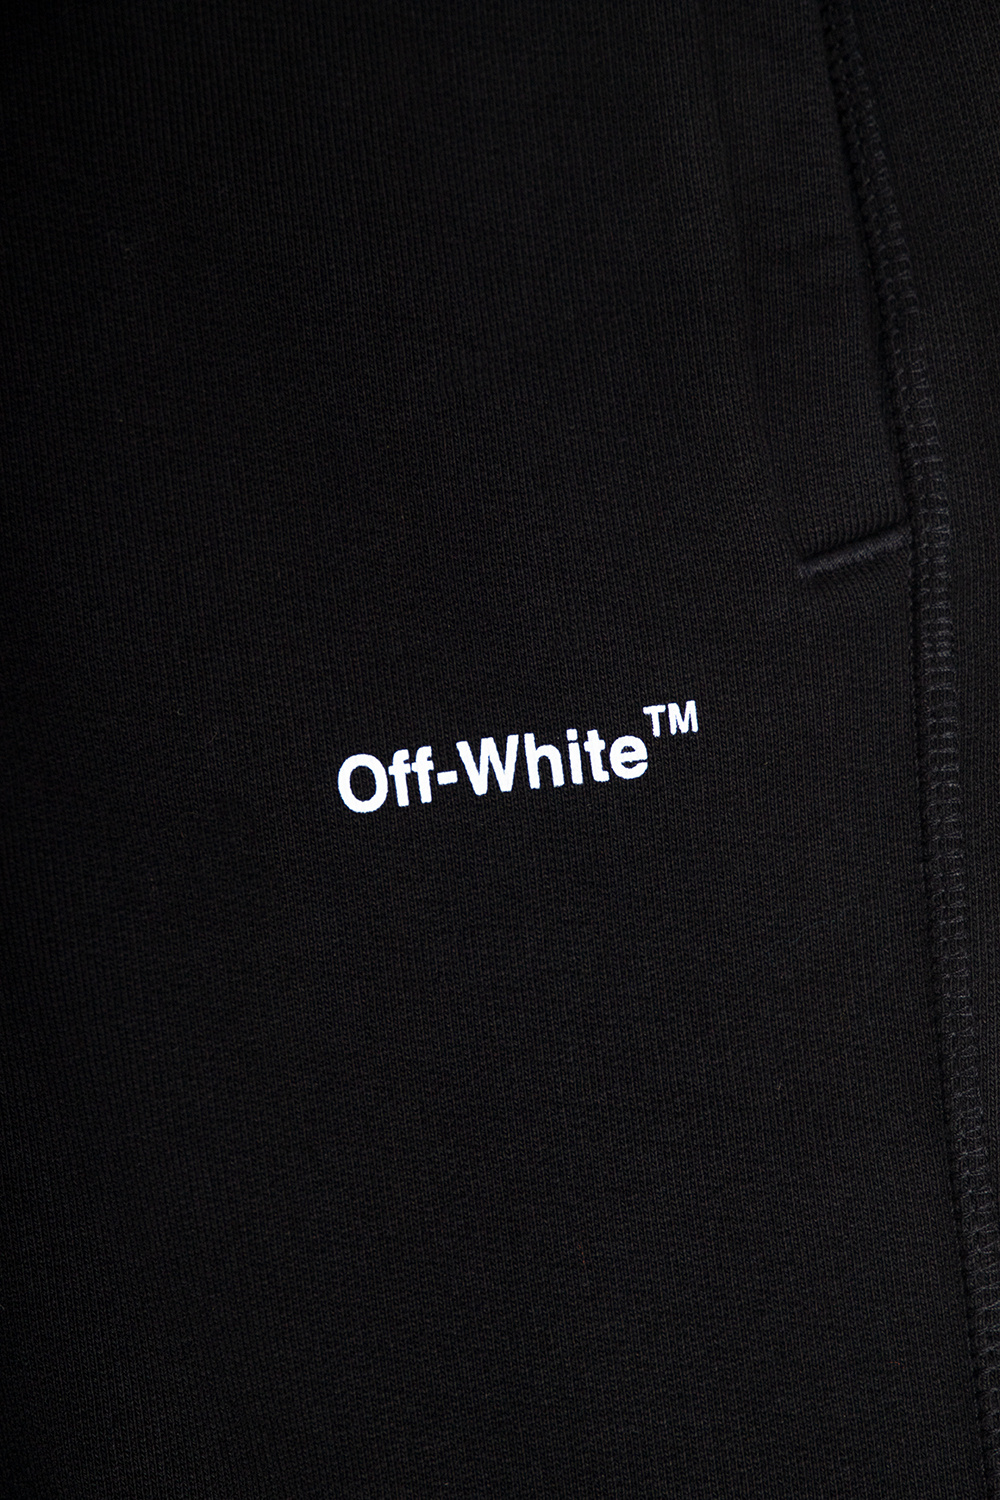 Off-White Kids Sweatpants with pockets